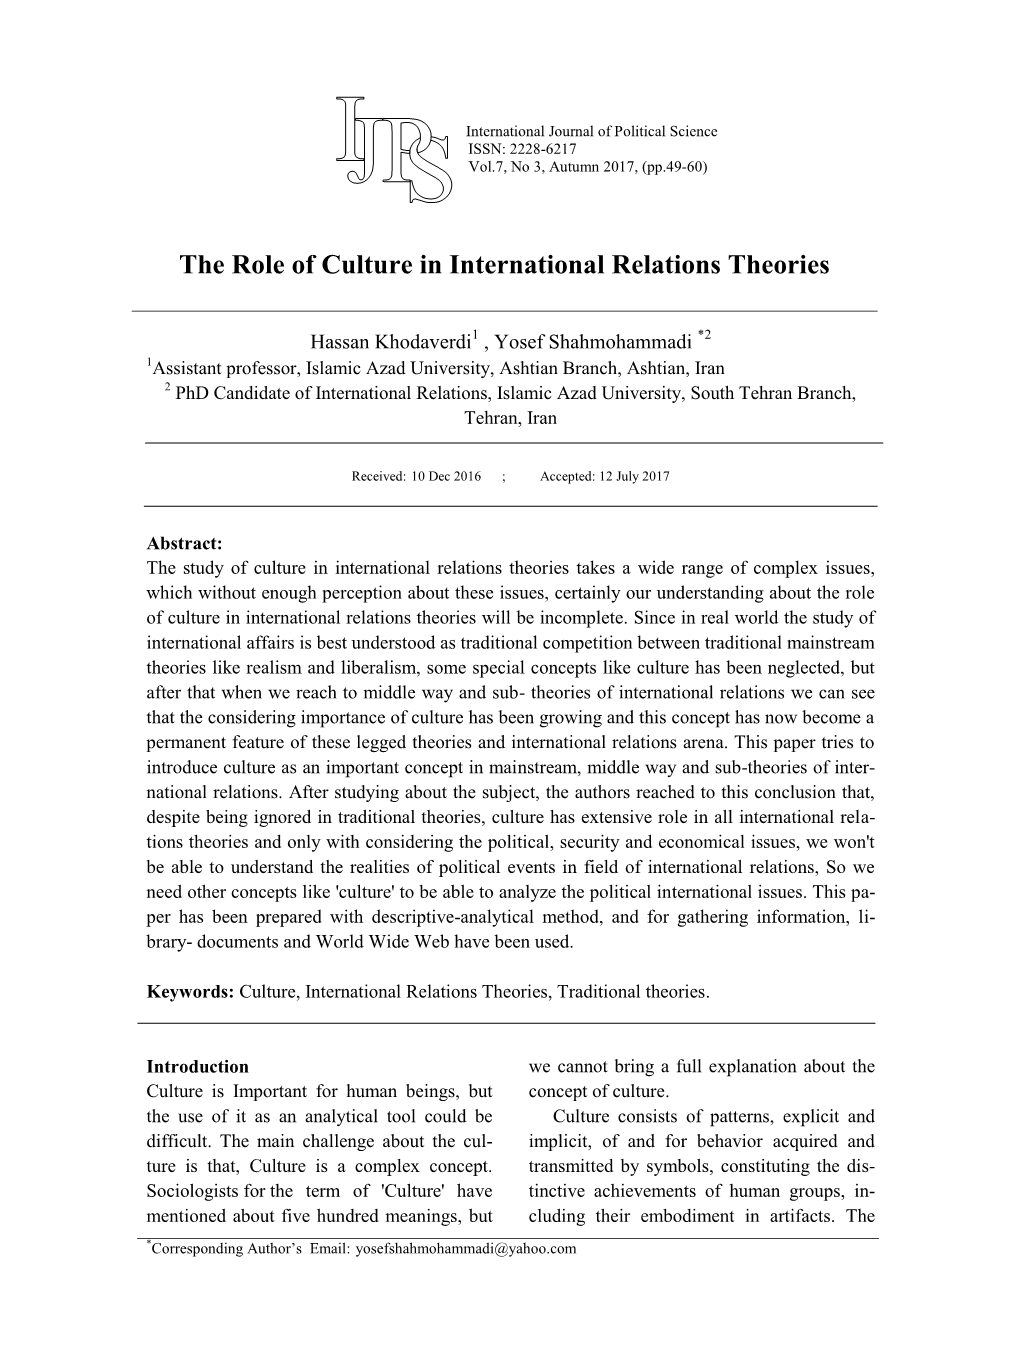 The Role of Culture in International Relations Theories